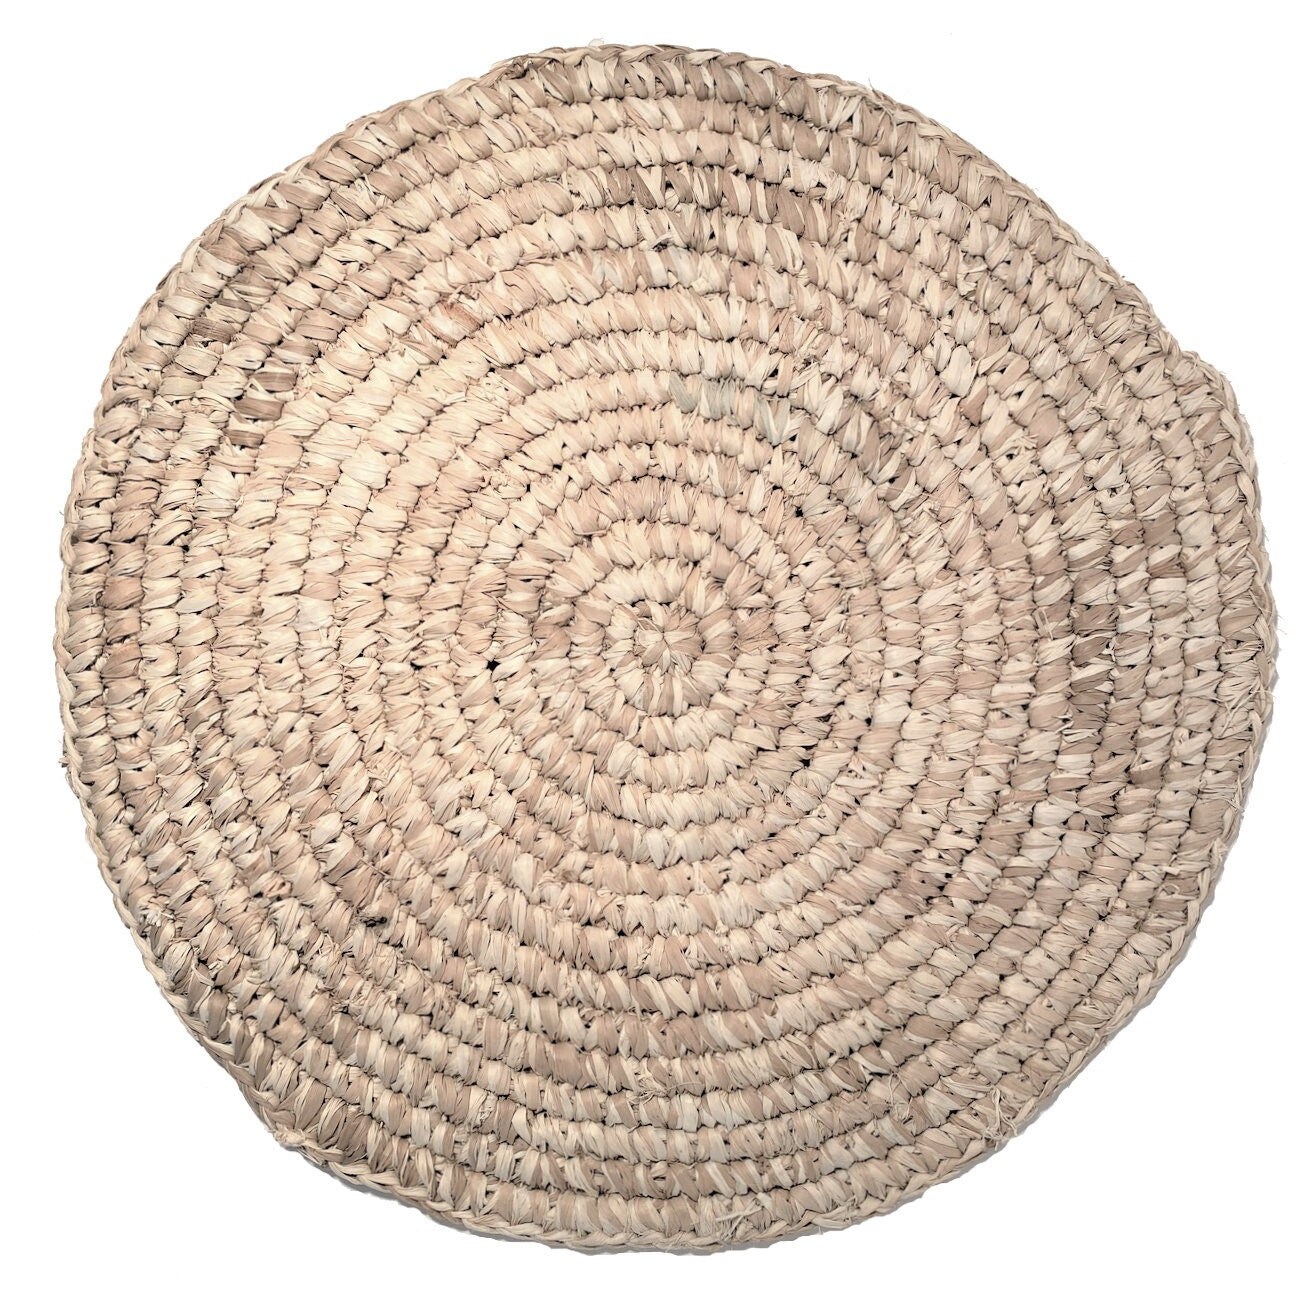 Water hyacinth placemats, round woven - 35cm diameter » Variant Name: 4  pieces, Color: Natural